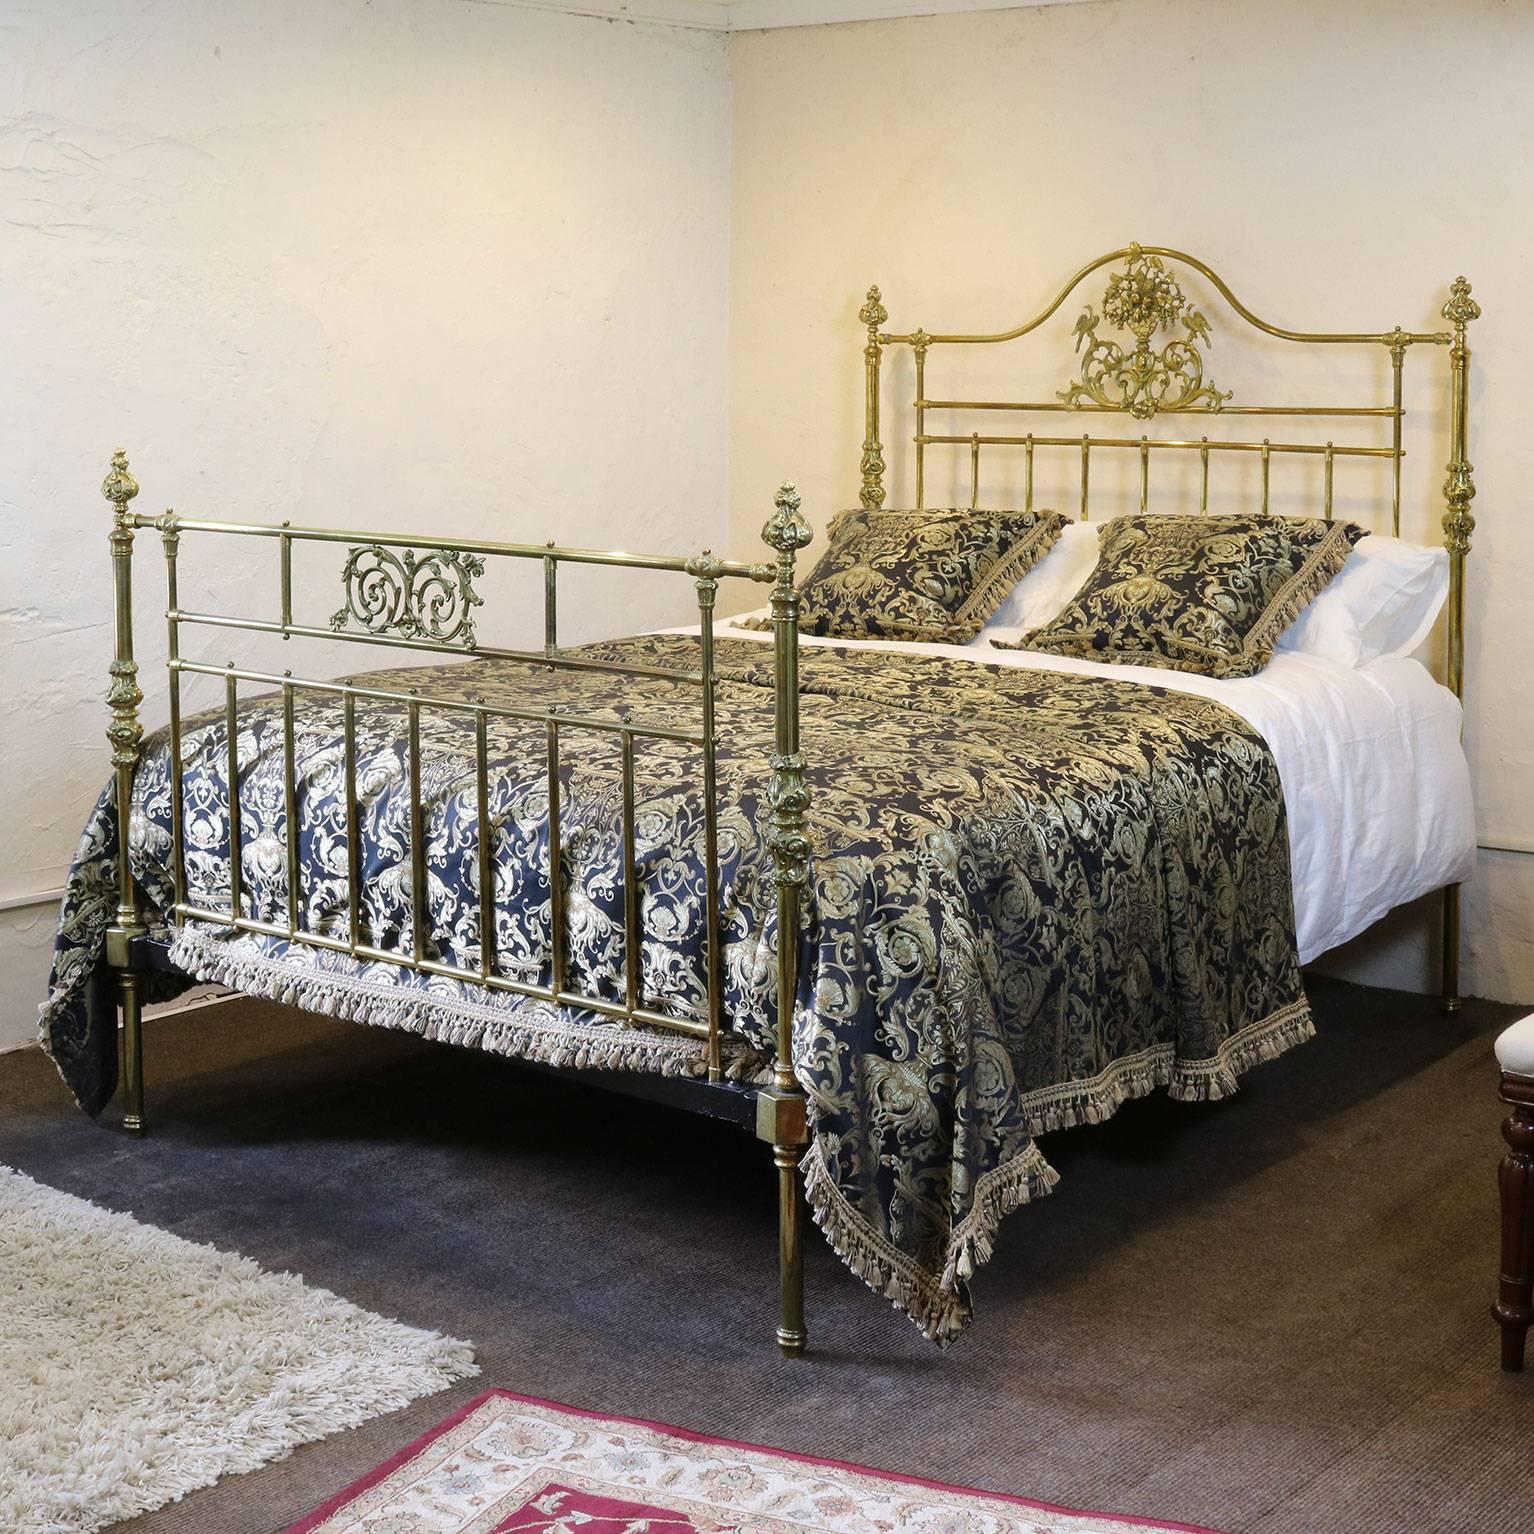 A superb all brass bed with decorative fittings on the posts, central cast brass plaque in the foot board, serpentine top rail on the head panel and ornate plaque in the centre of the head panel depicting mythical birds in foliage.

The brass on the